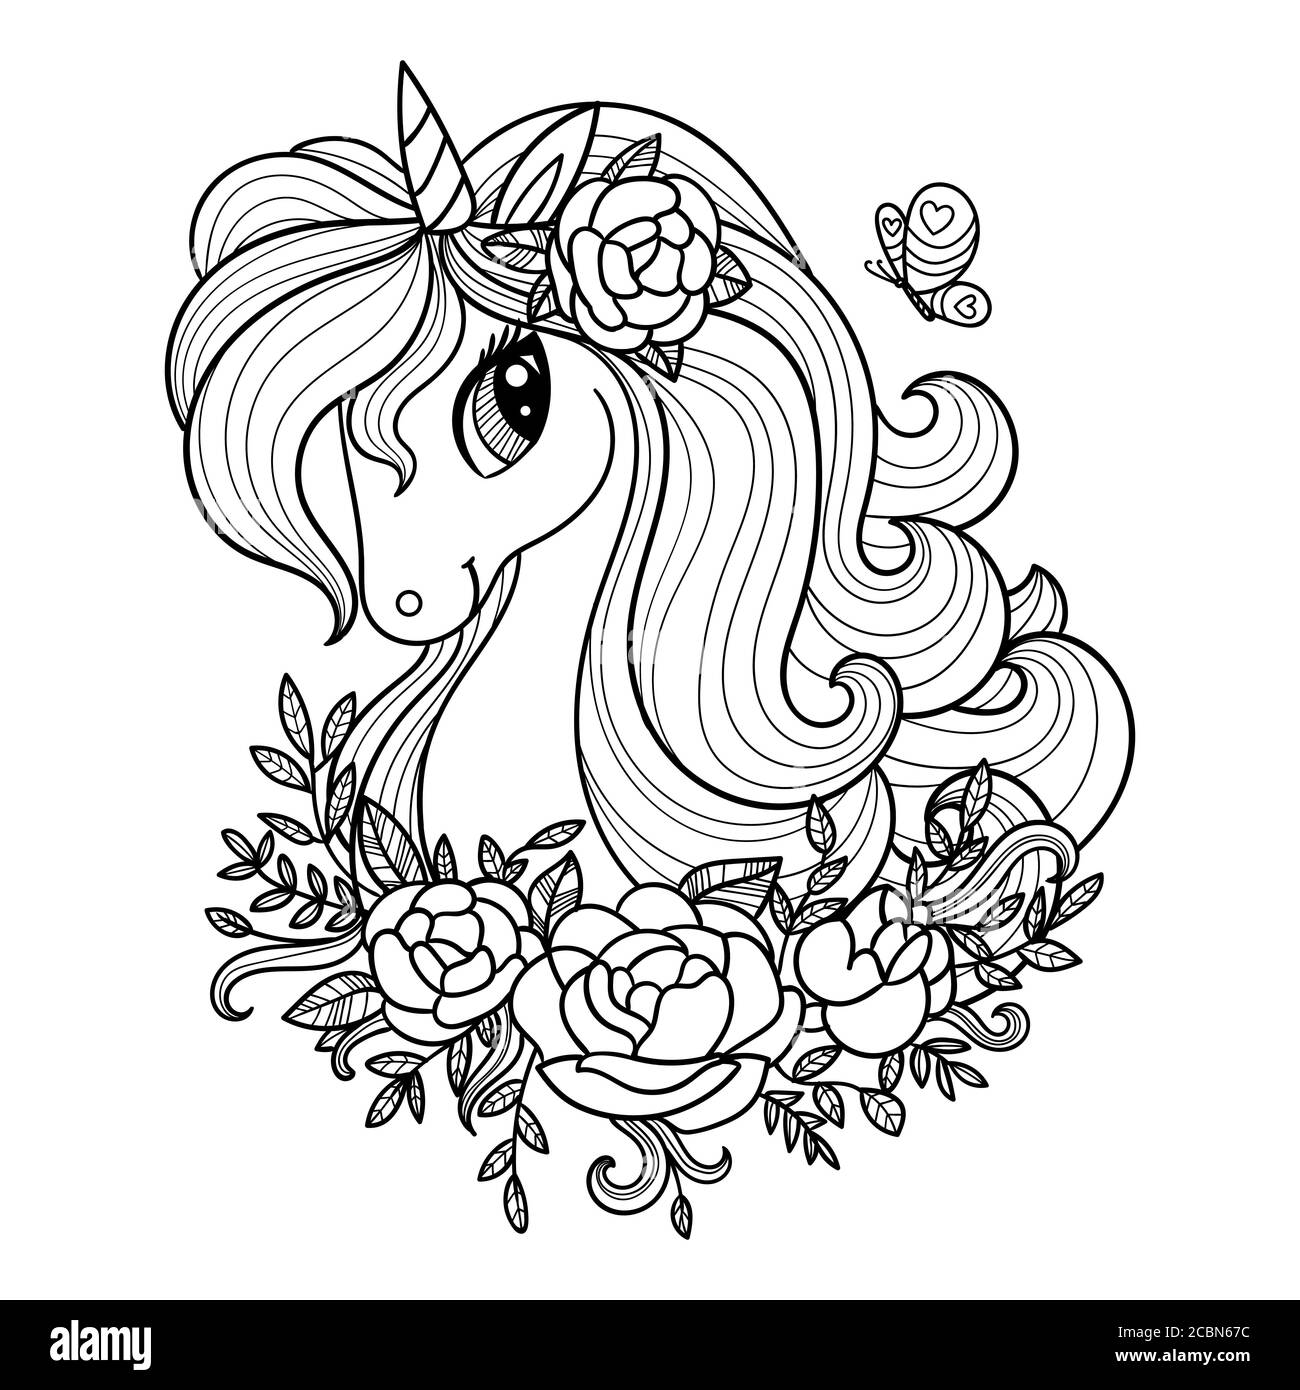 Unicorn head with long mane and flowers. Black-white linear drawing. For the design of coloring books, prints, posters, tattoos, postcards, stickers, Stock Vector